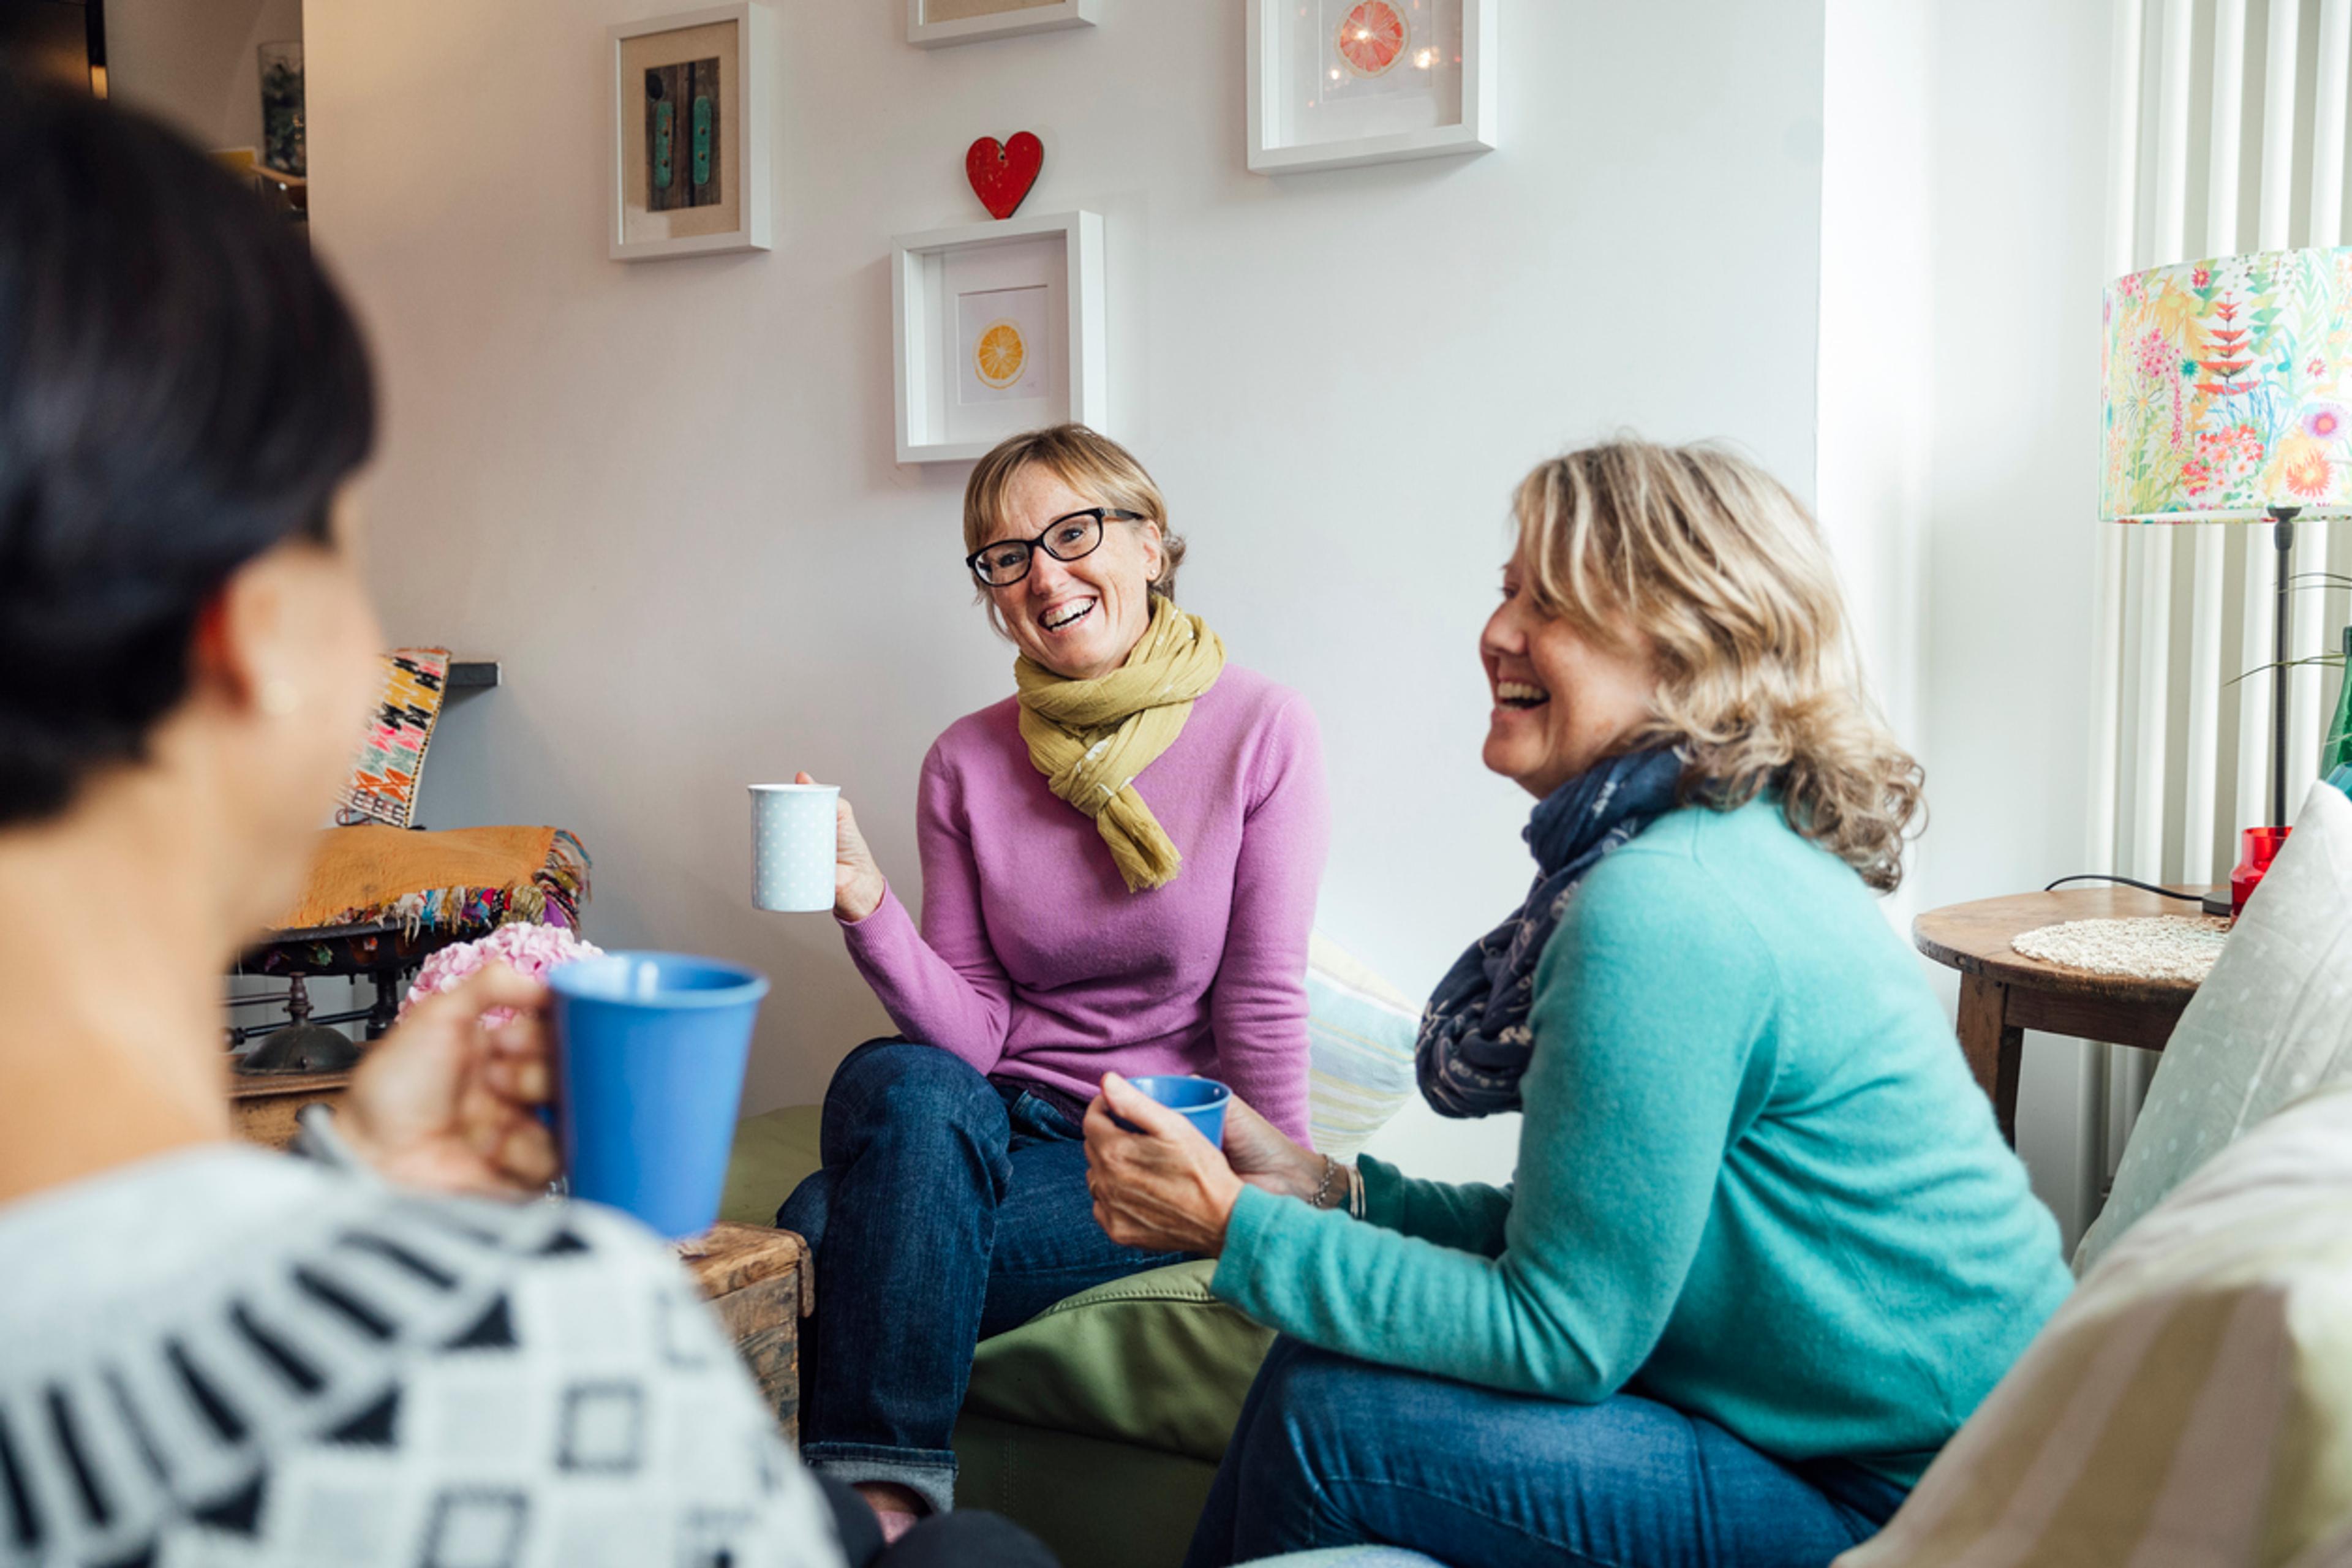 A group of women sat in a living room having cups of tea, laughing